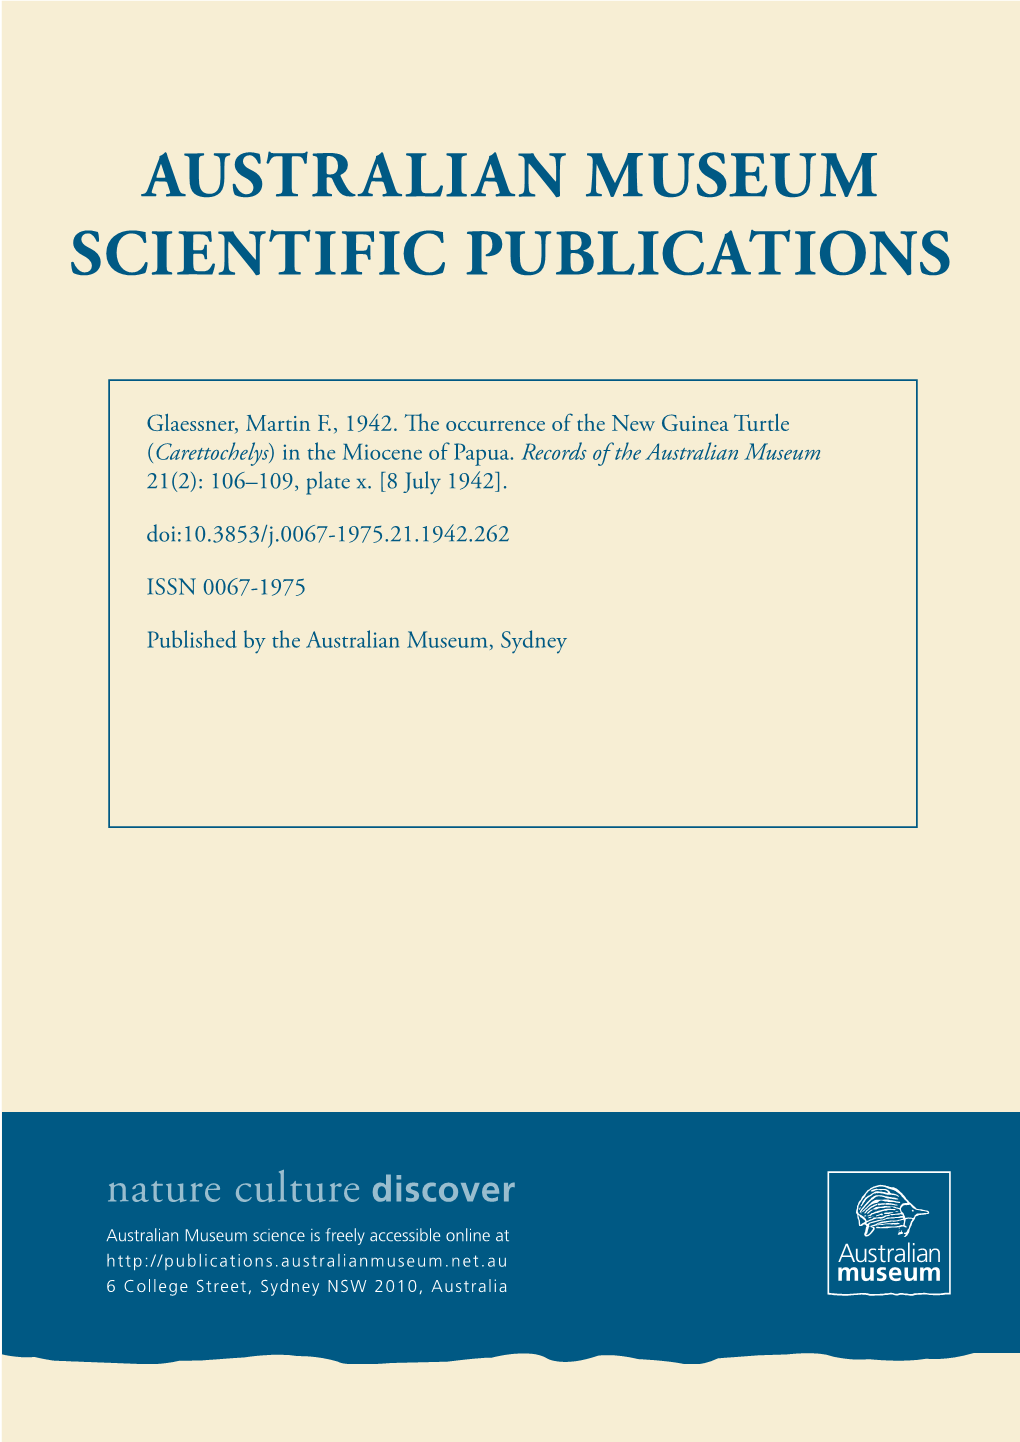 The Occurrence of the New Guinea Turtle (Carettochelys) in the Miocene of Papua